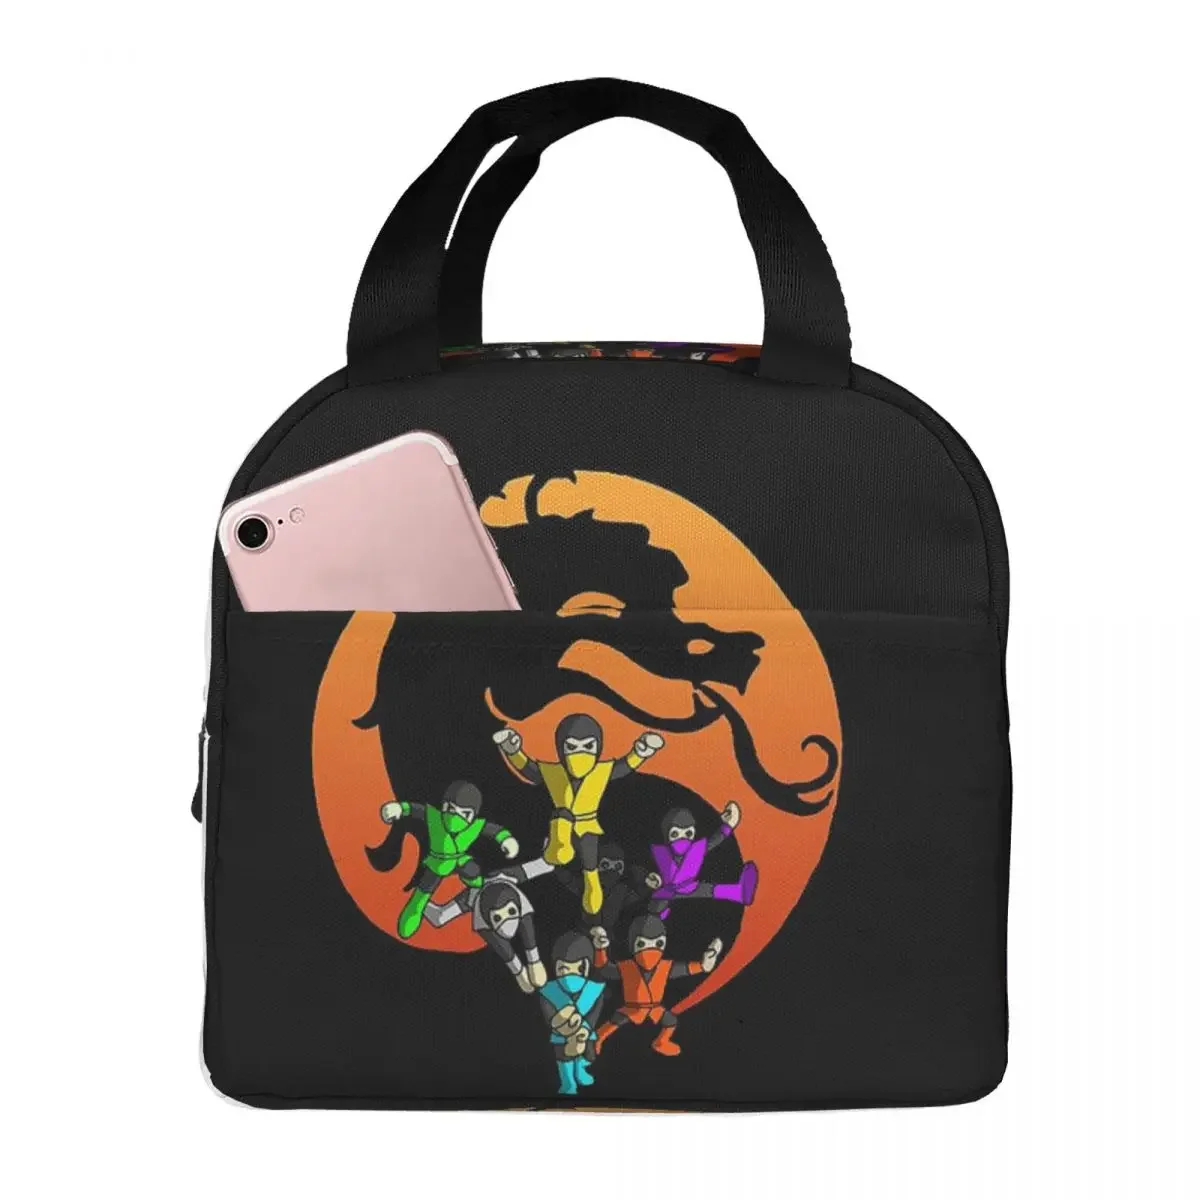 

Mortal Kombat Logo Insulated Lunch Bags Waterproof Picnic Bag Thermal Cooler Lunch Box Lunch Tote for Woman Work Children School